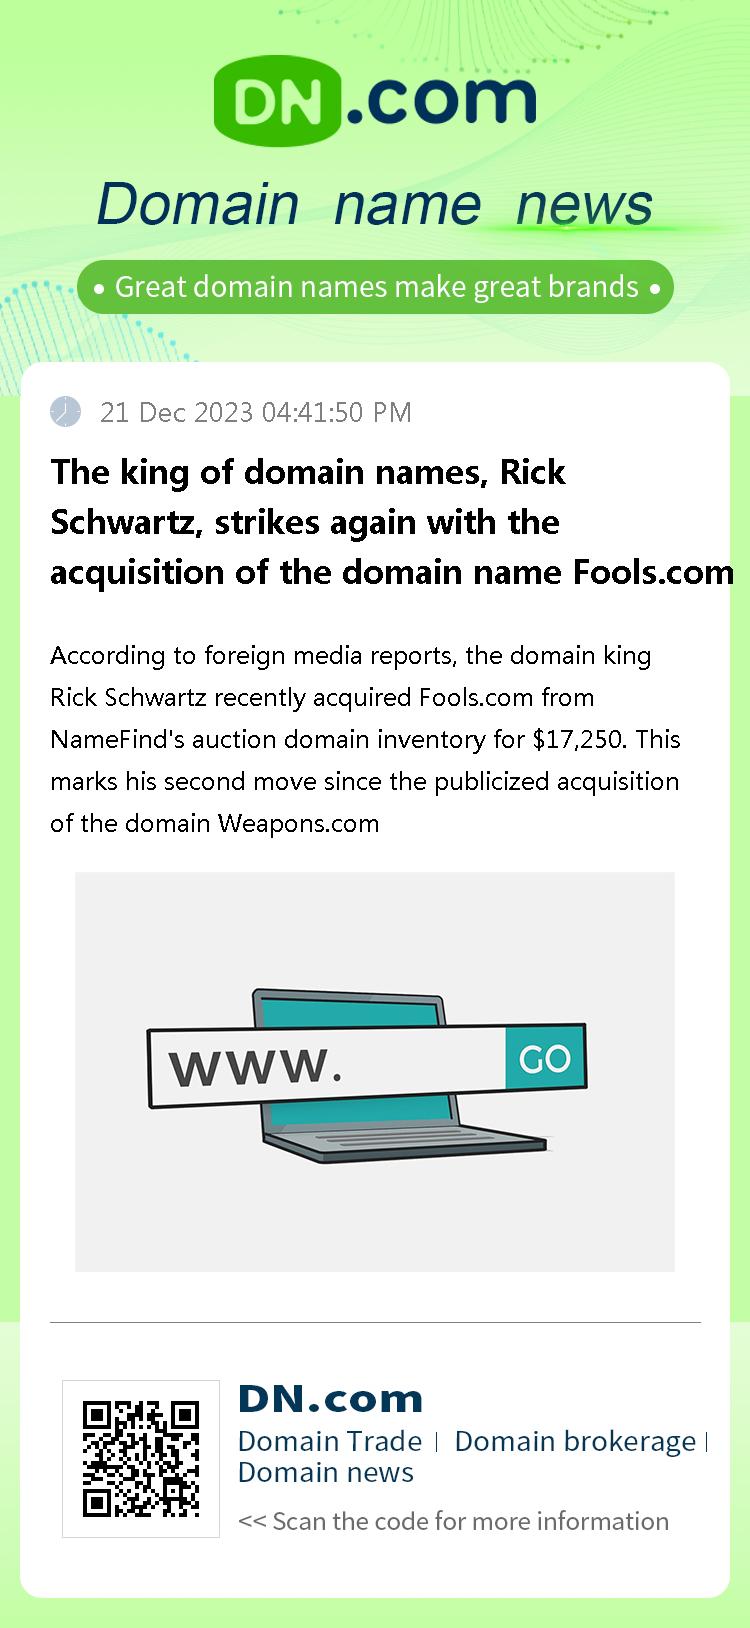 The king of domain names, Rick Schwartz, strikes again with the acquisition of the domain name Fools.com